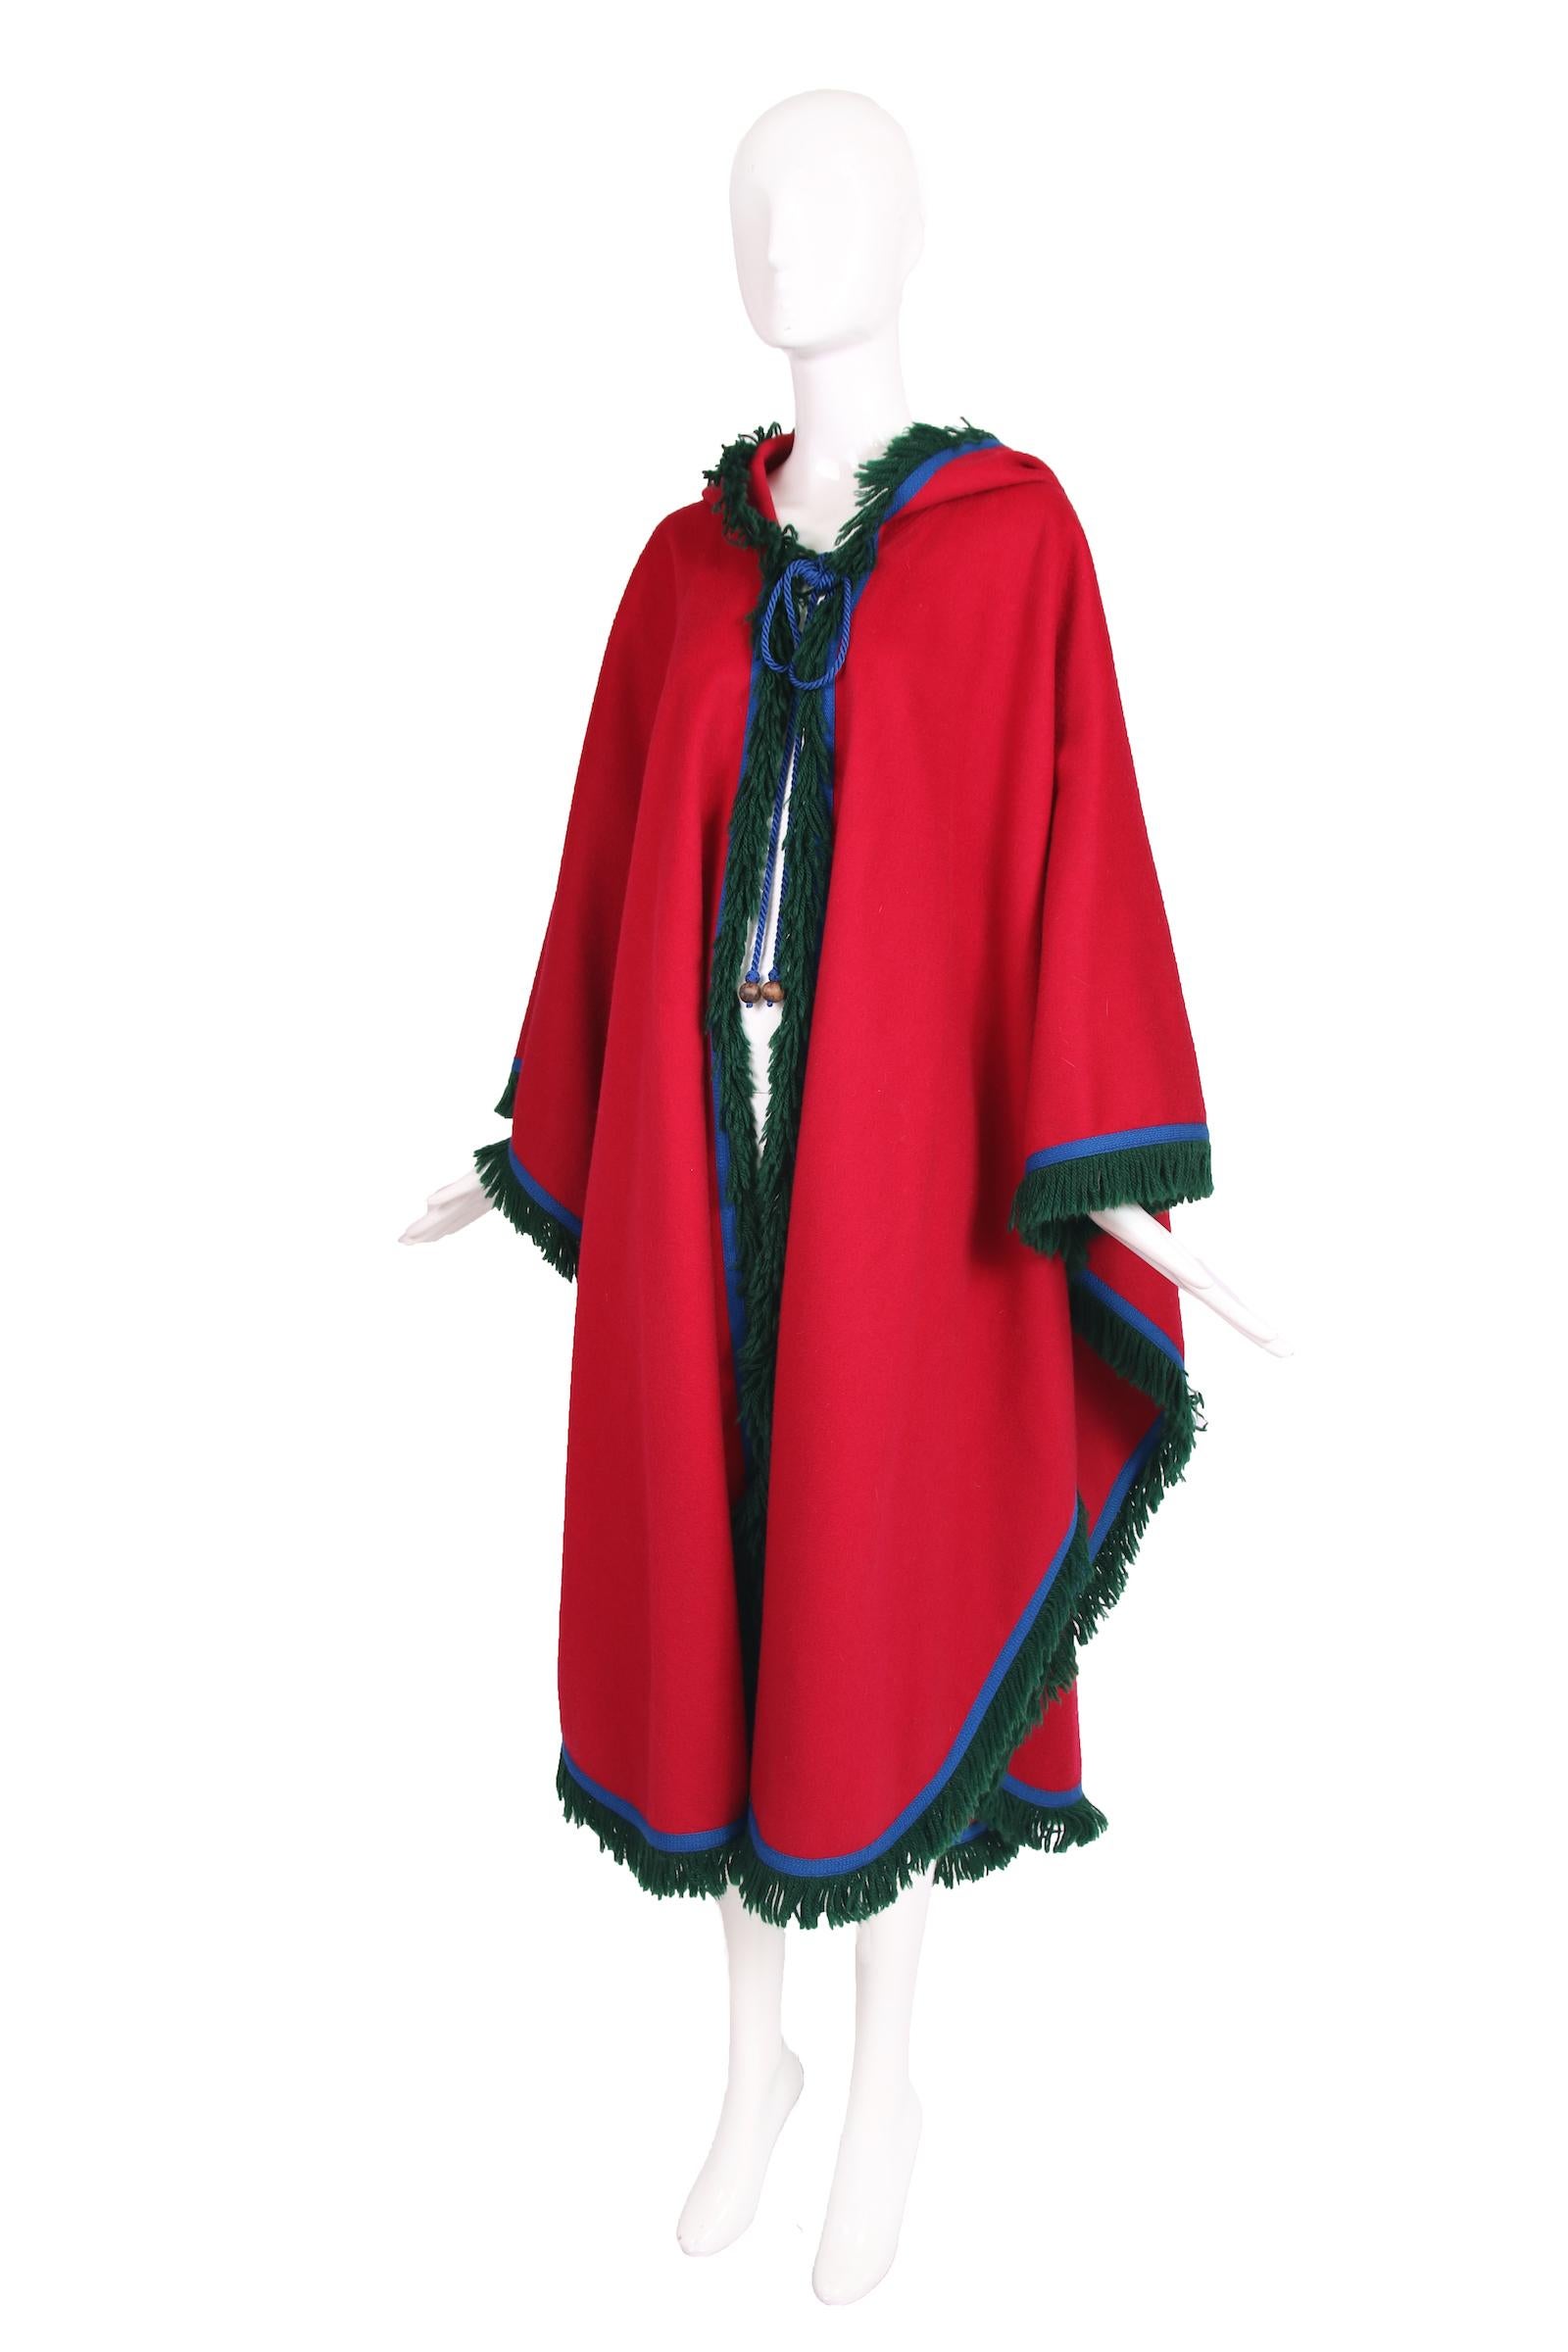 1970's Yves Saint Laurent (Rive Gauche) 100% red melton wool cape with royal blue wool cord as trim, green wool fringe and blue silk cord ties at the neck. Cape features a hood with a blue silk tassel attached to the tip. No size tag - one size fits